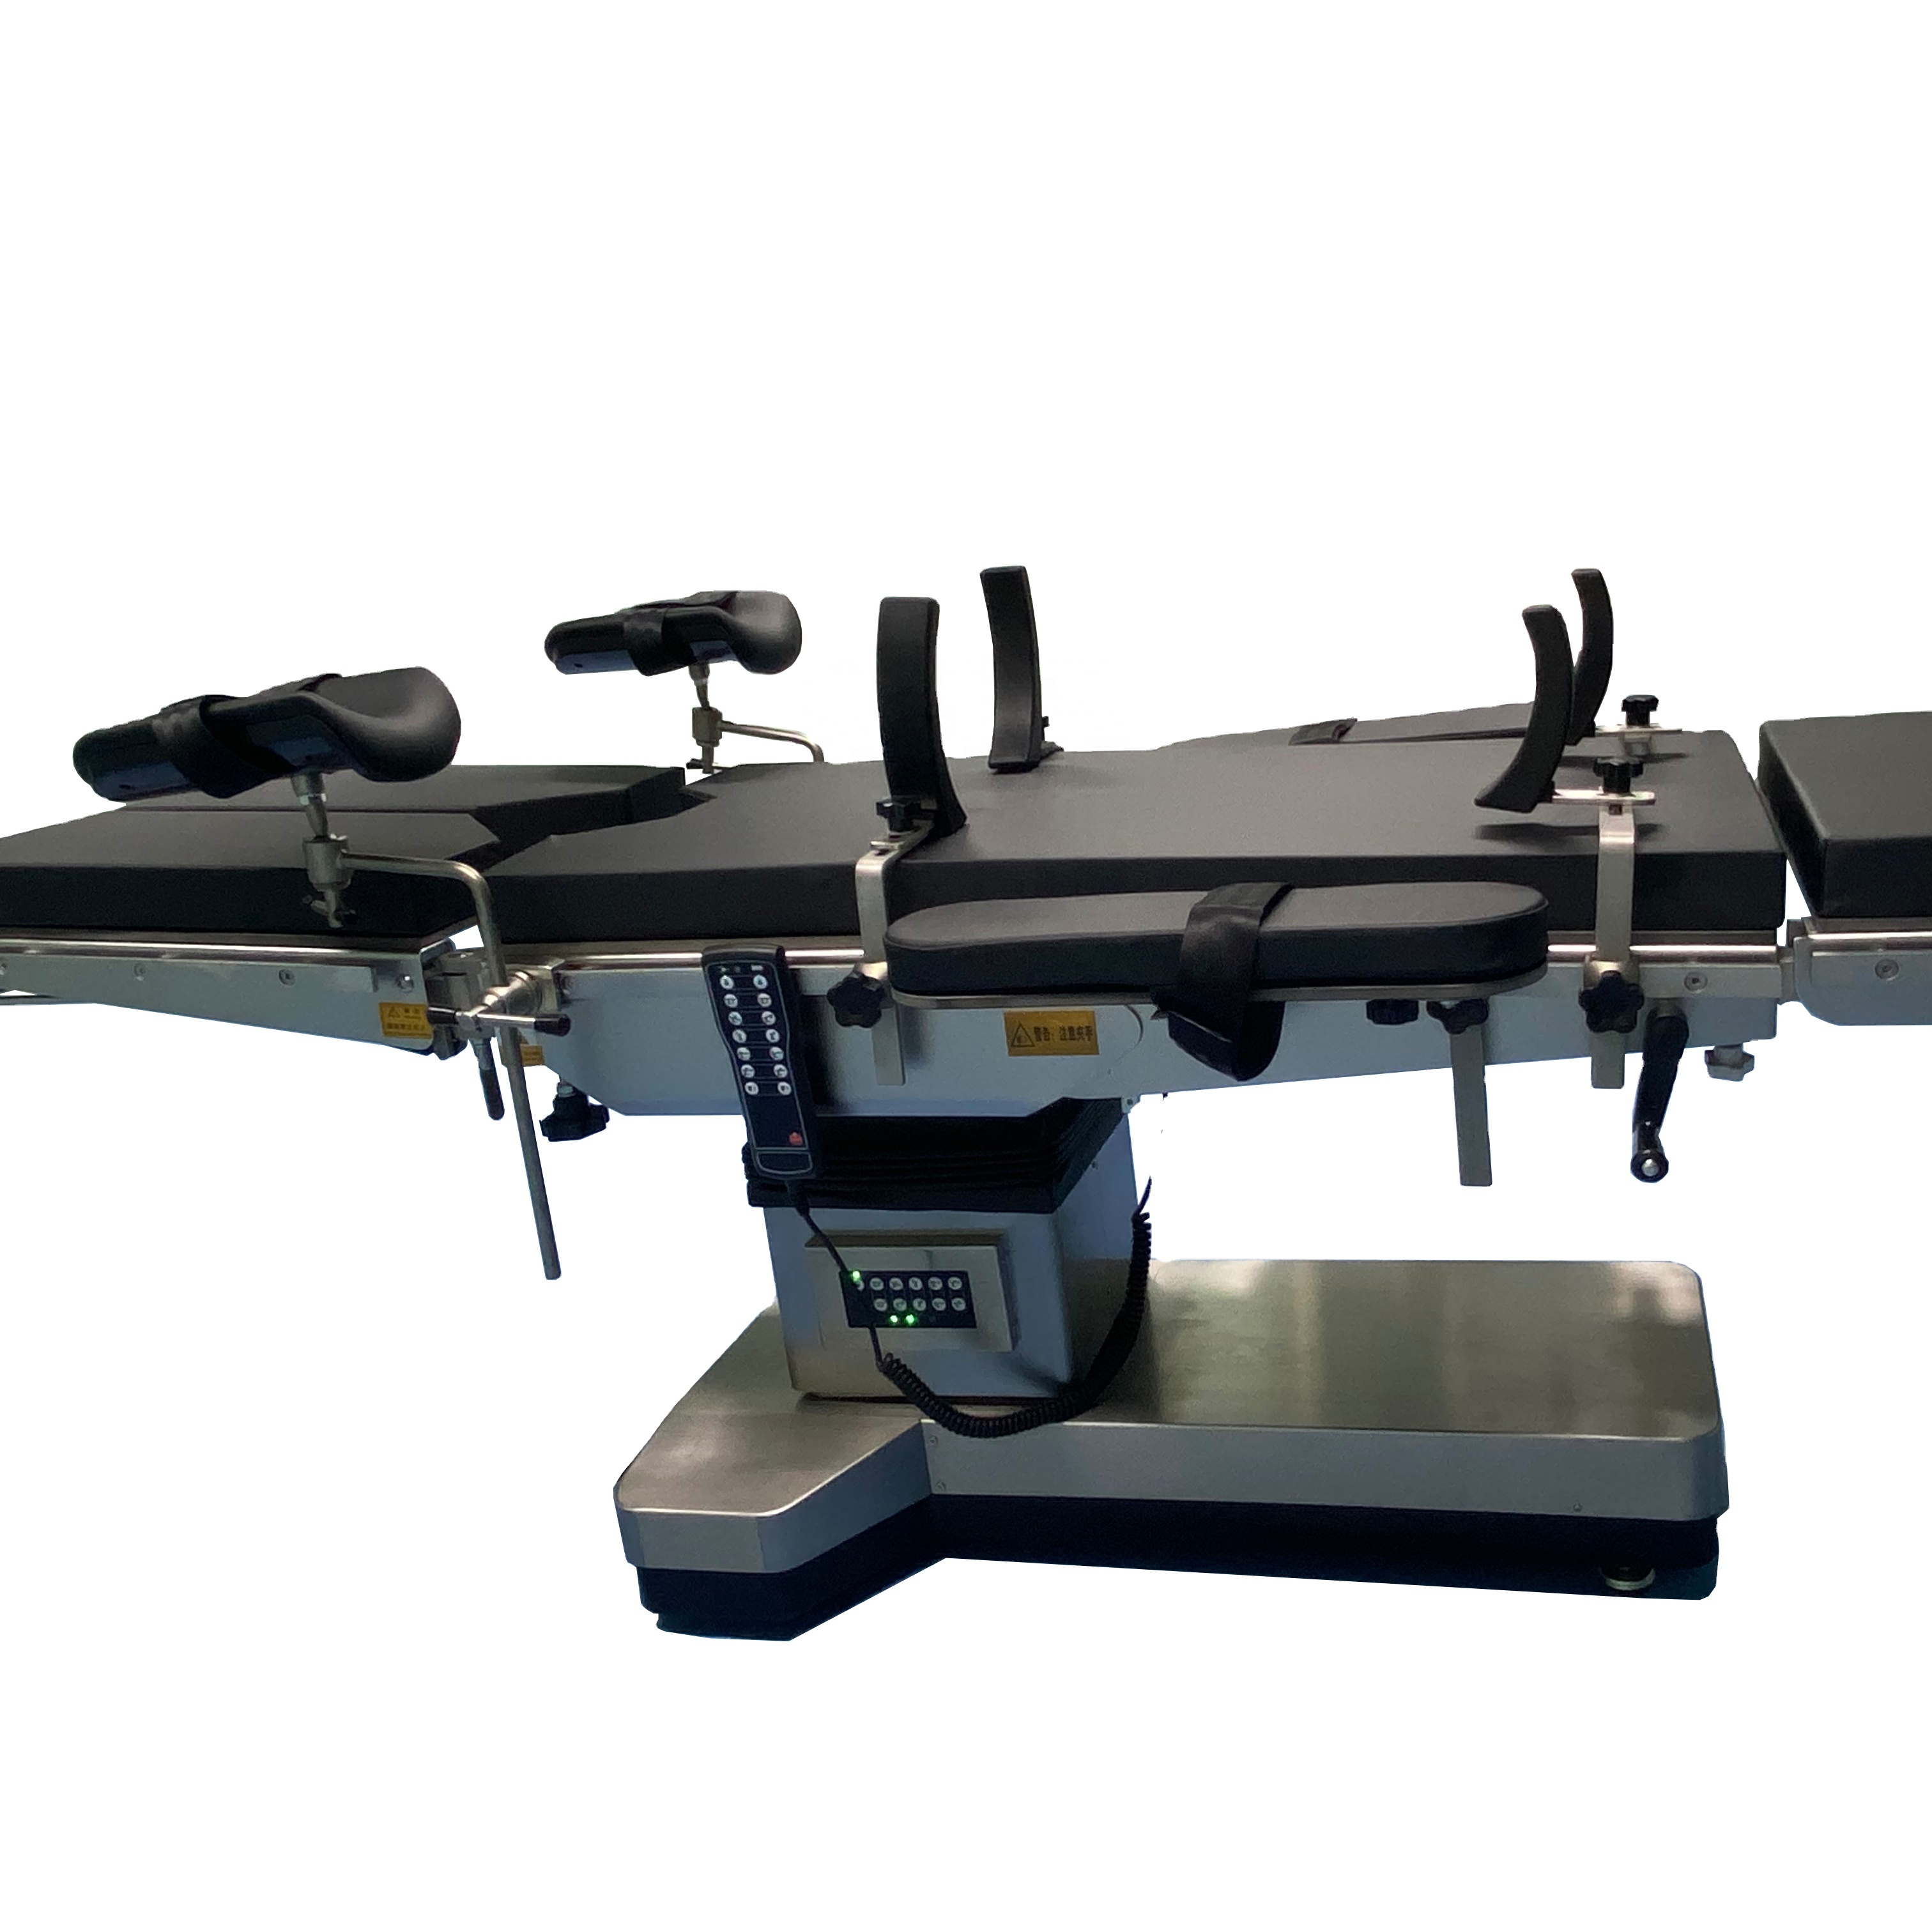 Double Control System OT Electric Multi-Function Operating Table Model ET-300 OT Table